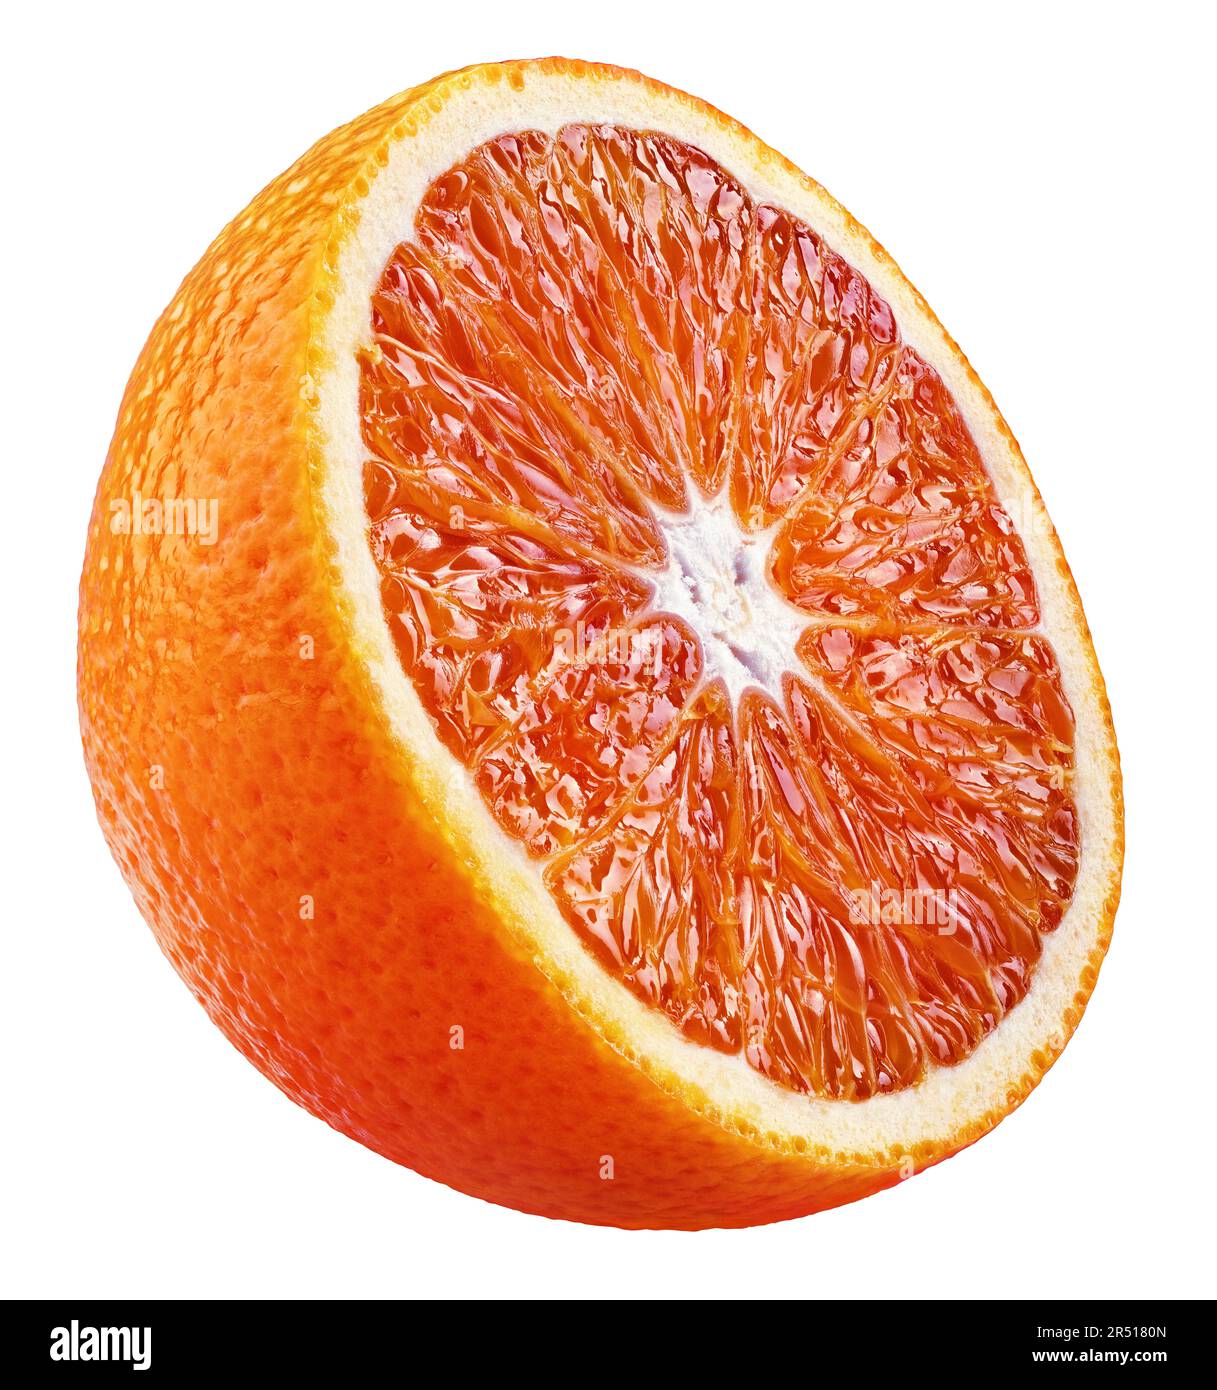 Half of blood red orange citrus fruit isolated on white background with clipping path. Full depth of field. Stock Photo